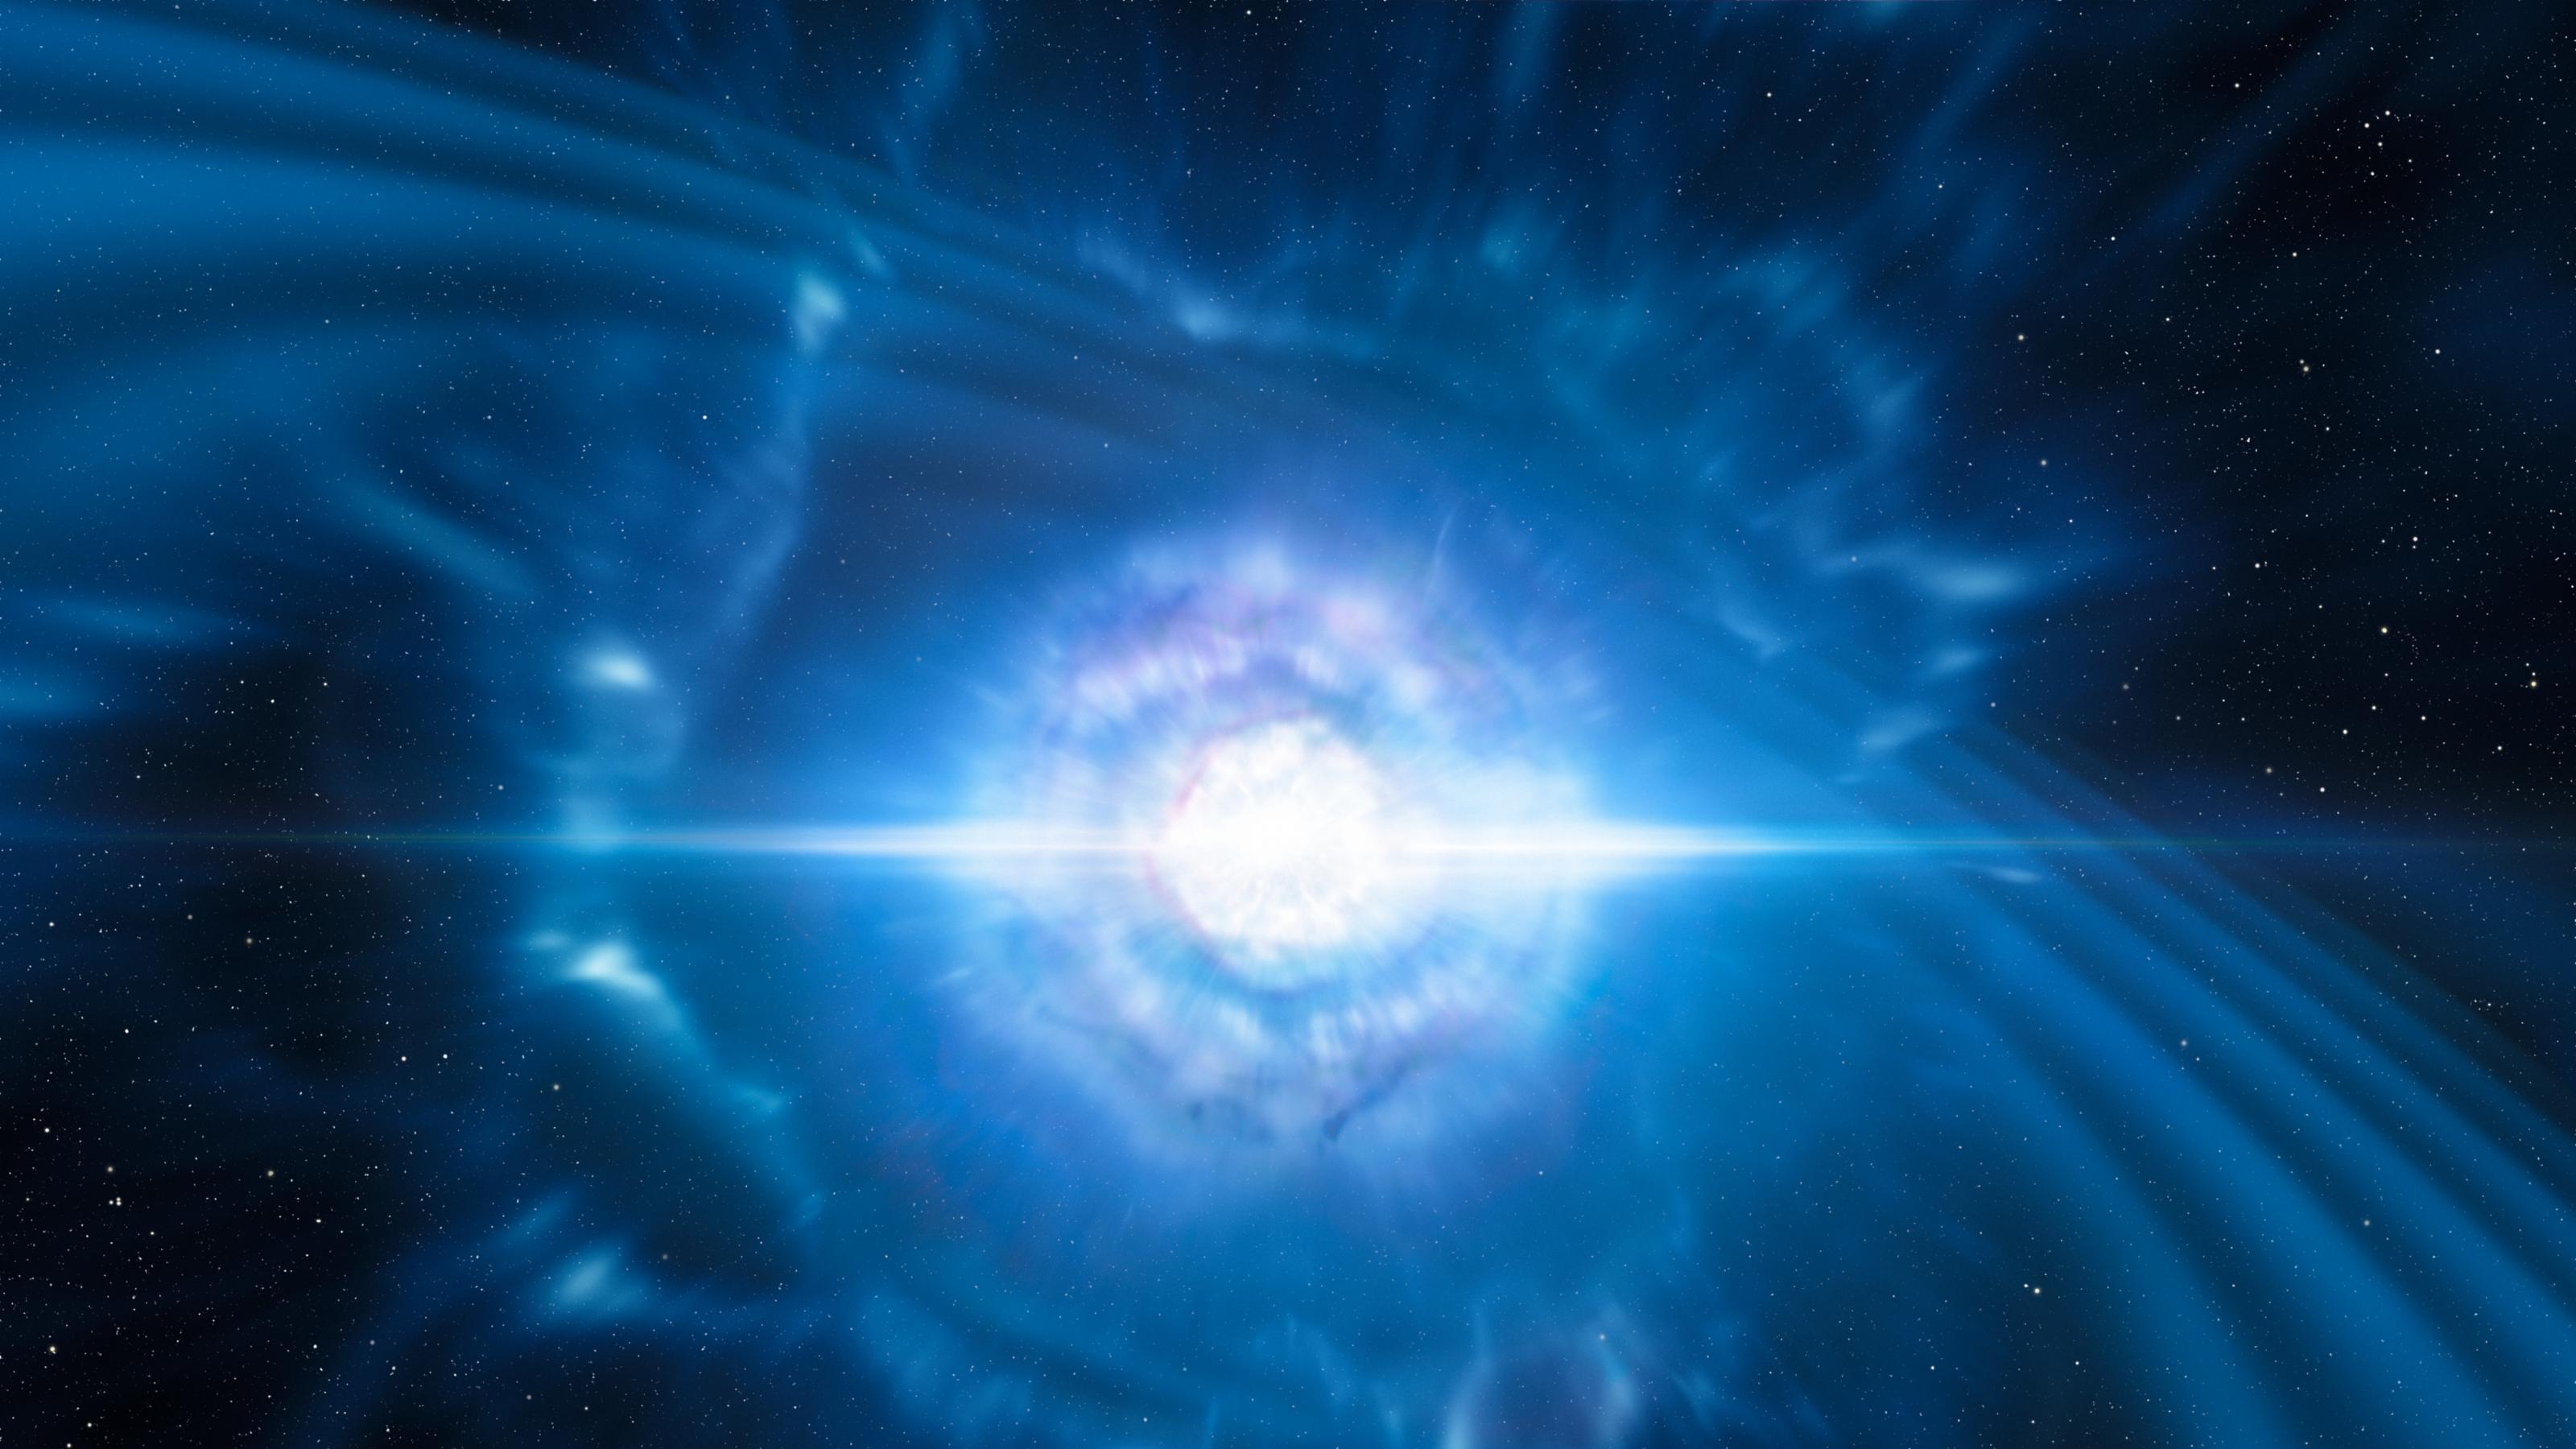 This artist?s impression shows two tiny but very dense neutron stars at the point at which they merge and explode as a kilonova. Such a very rare event is expected to produce both gravitational waves and a short gamma-ray burst, both of which were observed on 17 August 2017 by LIGO?Virgo and Fermi/INTEGRAL respectively. Subsequent detailed observations with many ESO telescopes confirmed that this object, seen in the galaxy NGC 4993 about 130 million light-years from the Earth, is indeed a kilonova. Such objects are the main source of very heavy chemical elements, such as gold and platinum, in the Universe.